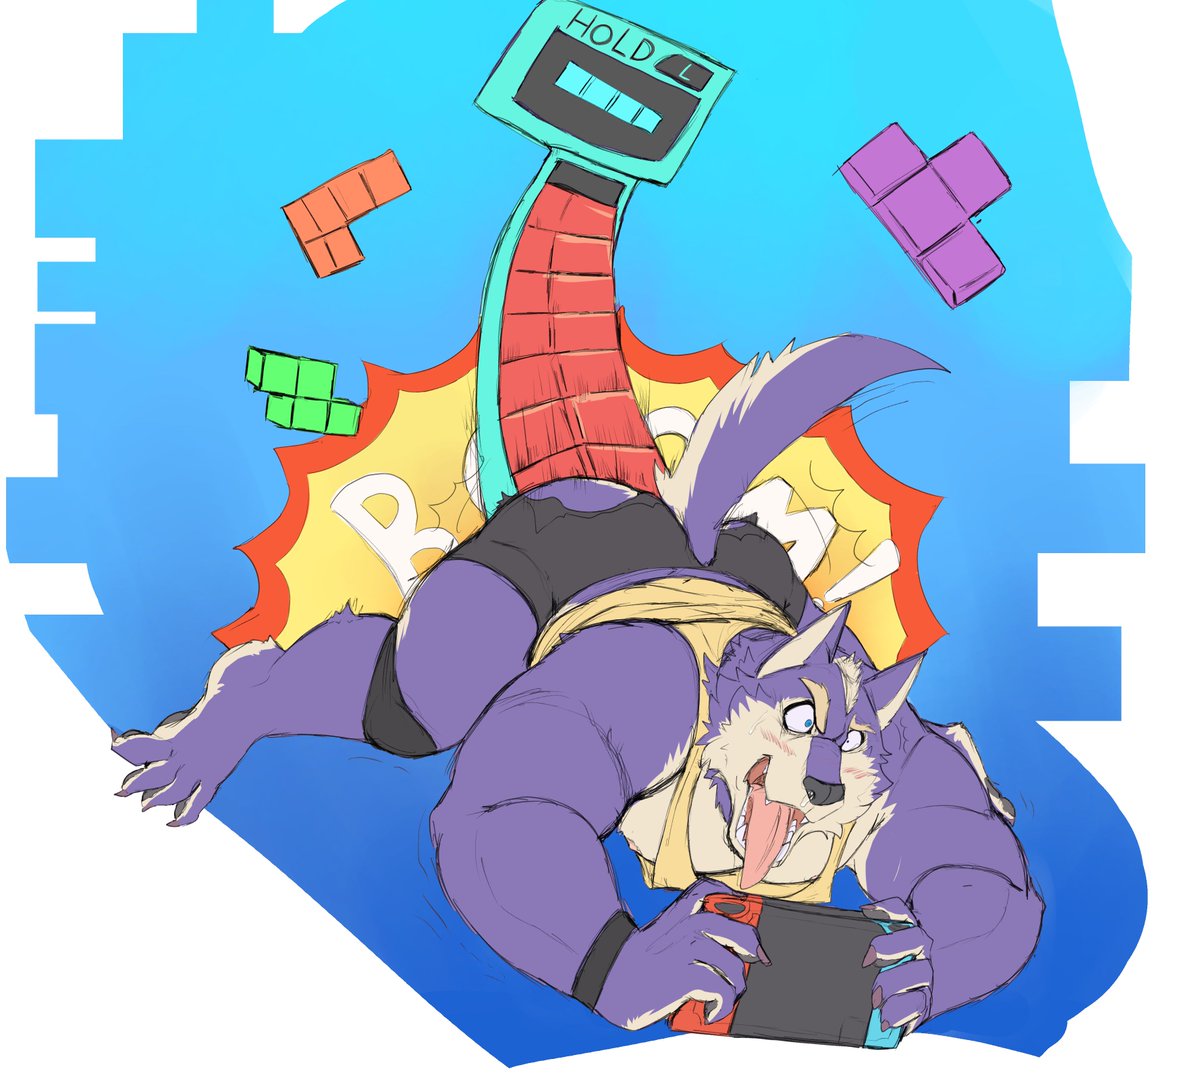 The feeling when play Tetris 99....i love this game https://t.co/ERjOaYP0op...